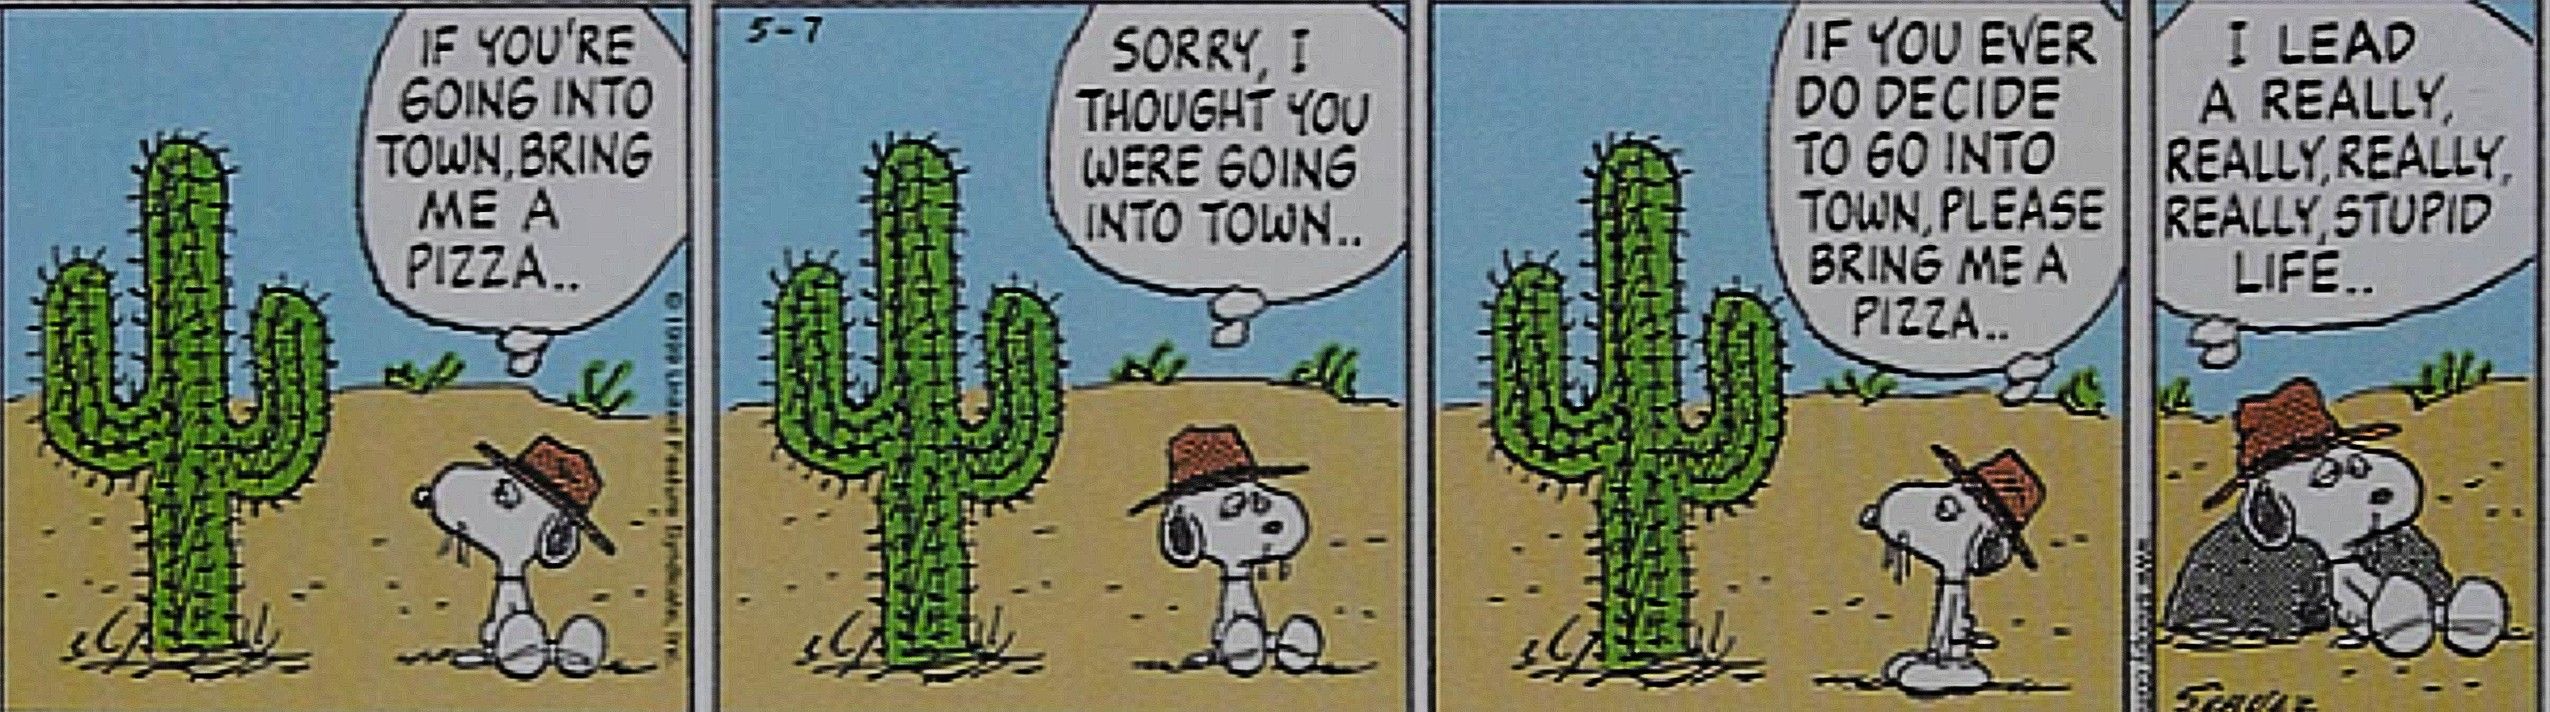 Peanuts, Snoopy's brother Spike reflecting on his 'really, really, really stupid' life